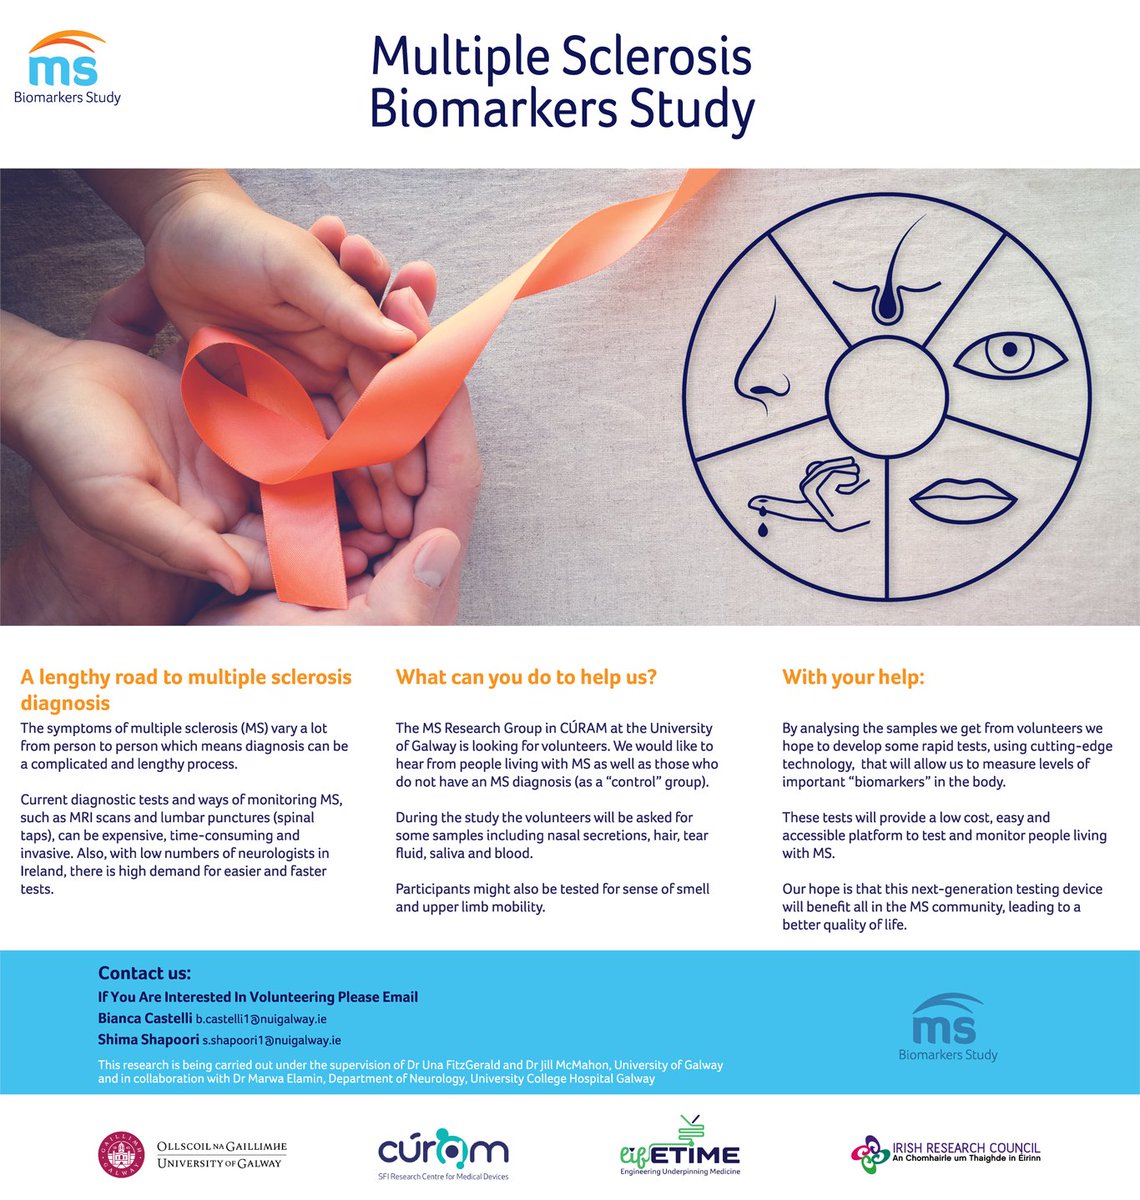 We are happy to announce that we have officially began to recruit volunteers for our MS biomarkers study! Want to know more? All the info is in our leaflet below! @shimashapoori @CURAMdevices